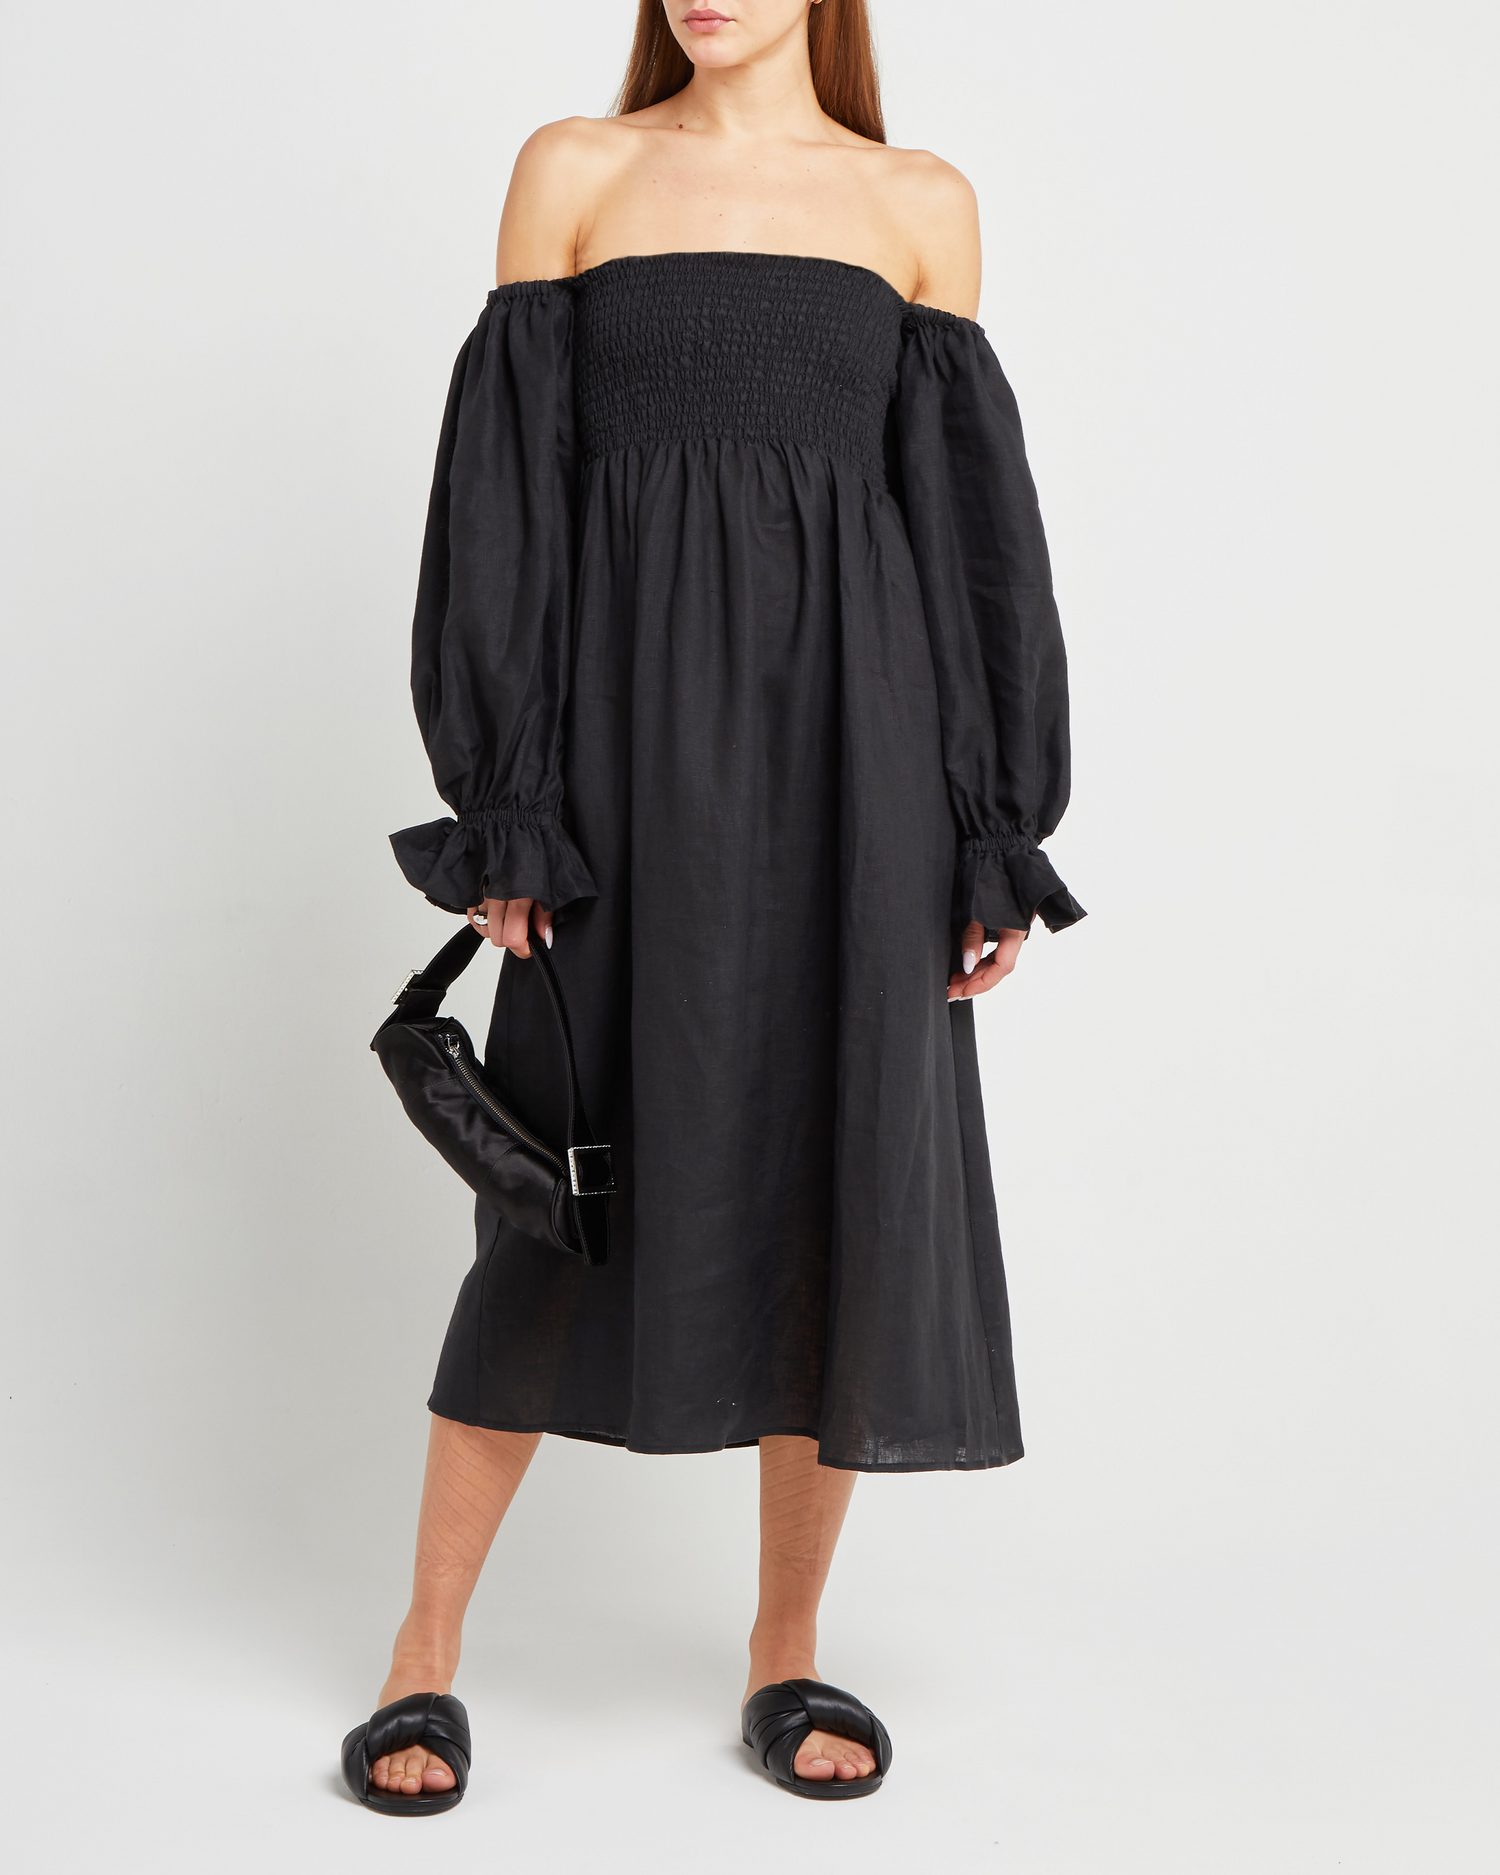 First image of Athena Dress, a black midi dress, off shoulder, long sleeve, puff sleeves, smocked